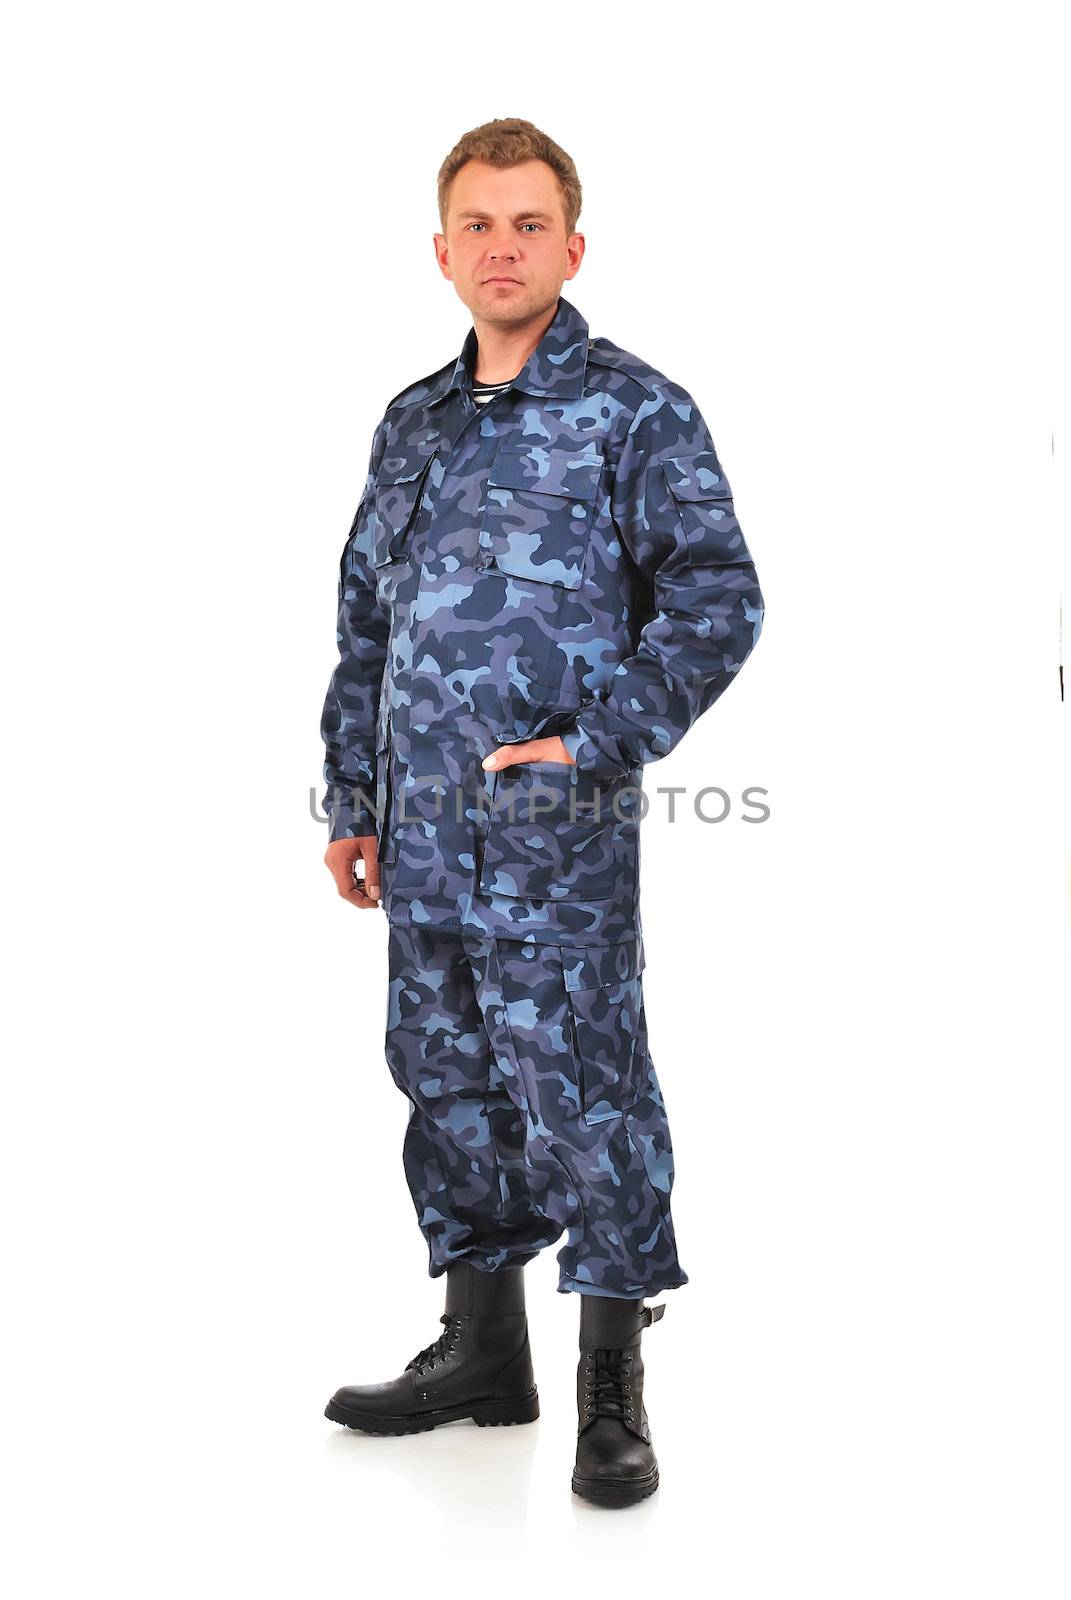 man in blue camouflage clothing on a white background